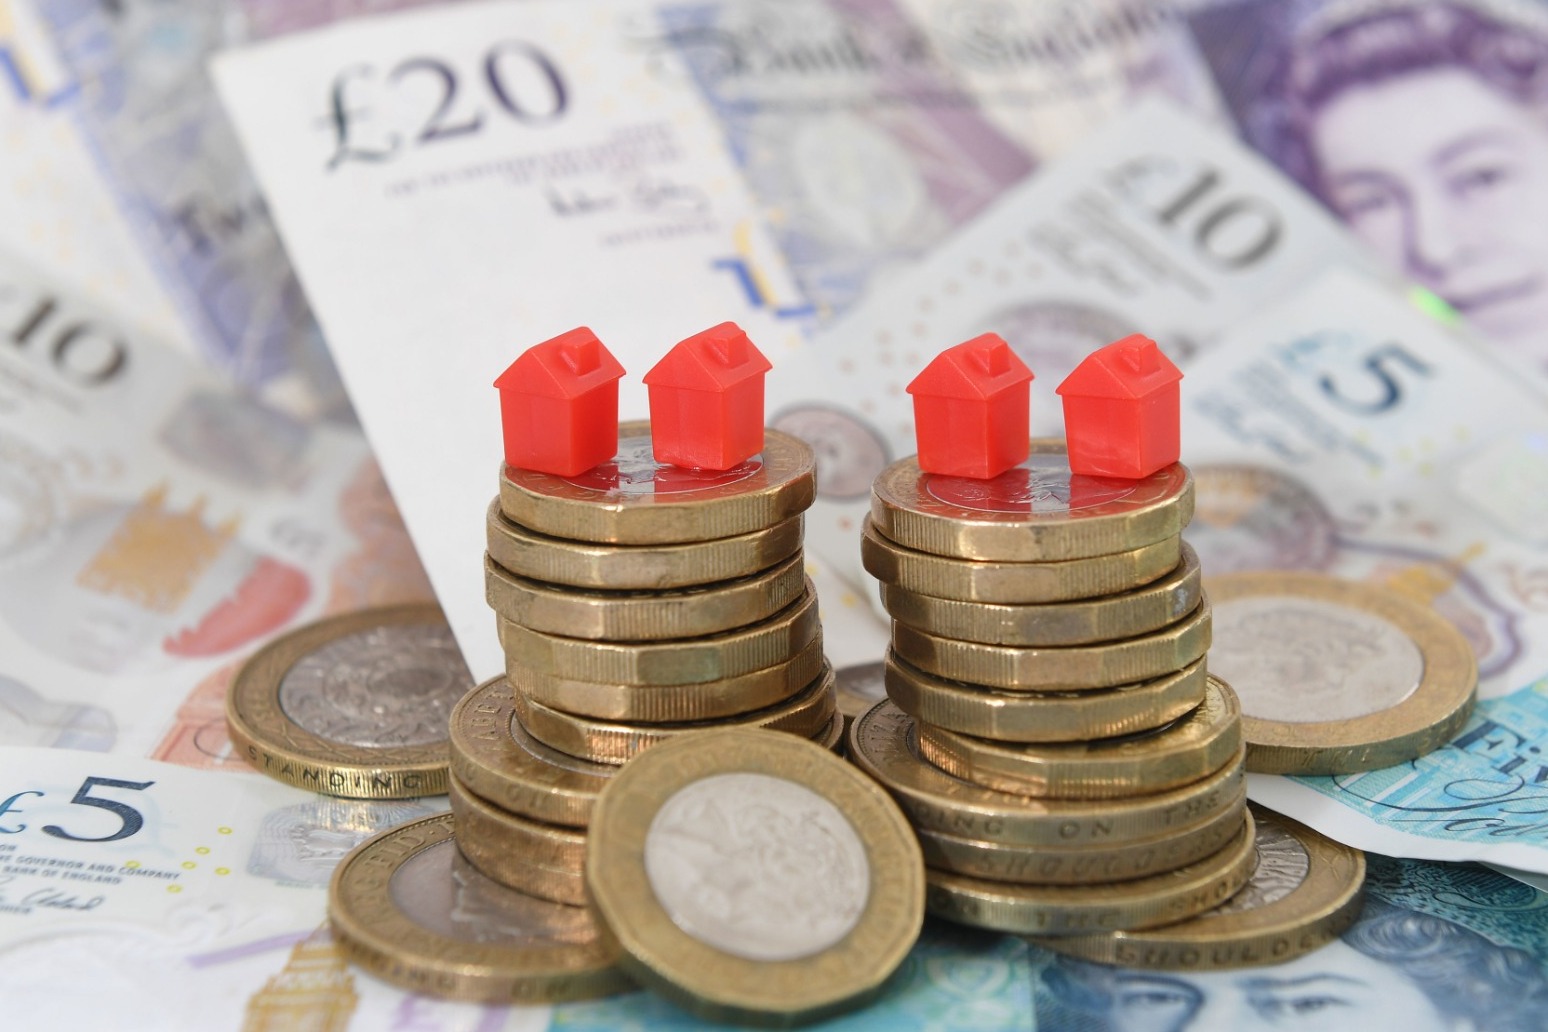 House prices increase across the whole of the UK for the first time in almost 2 years 